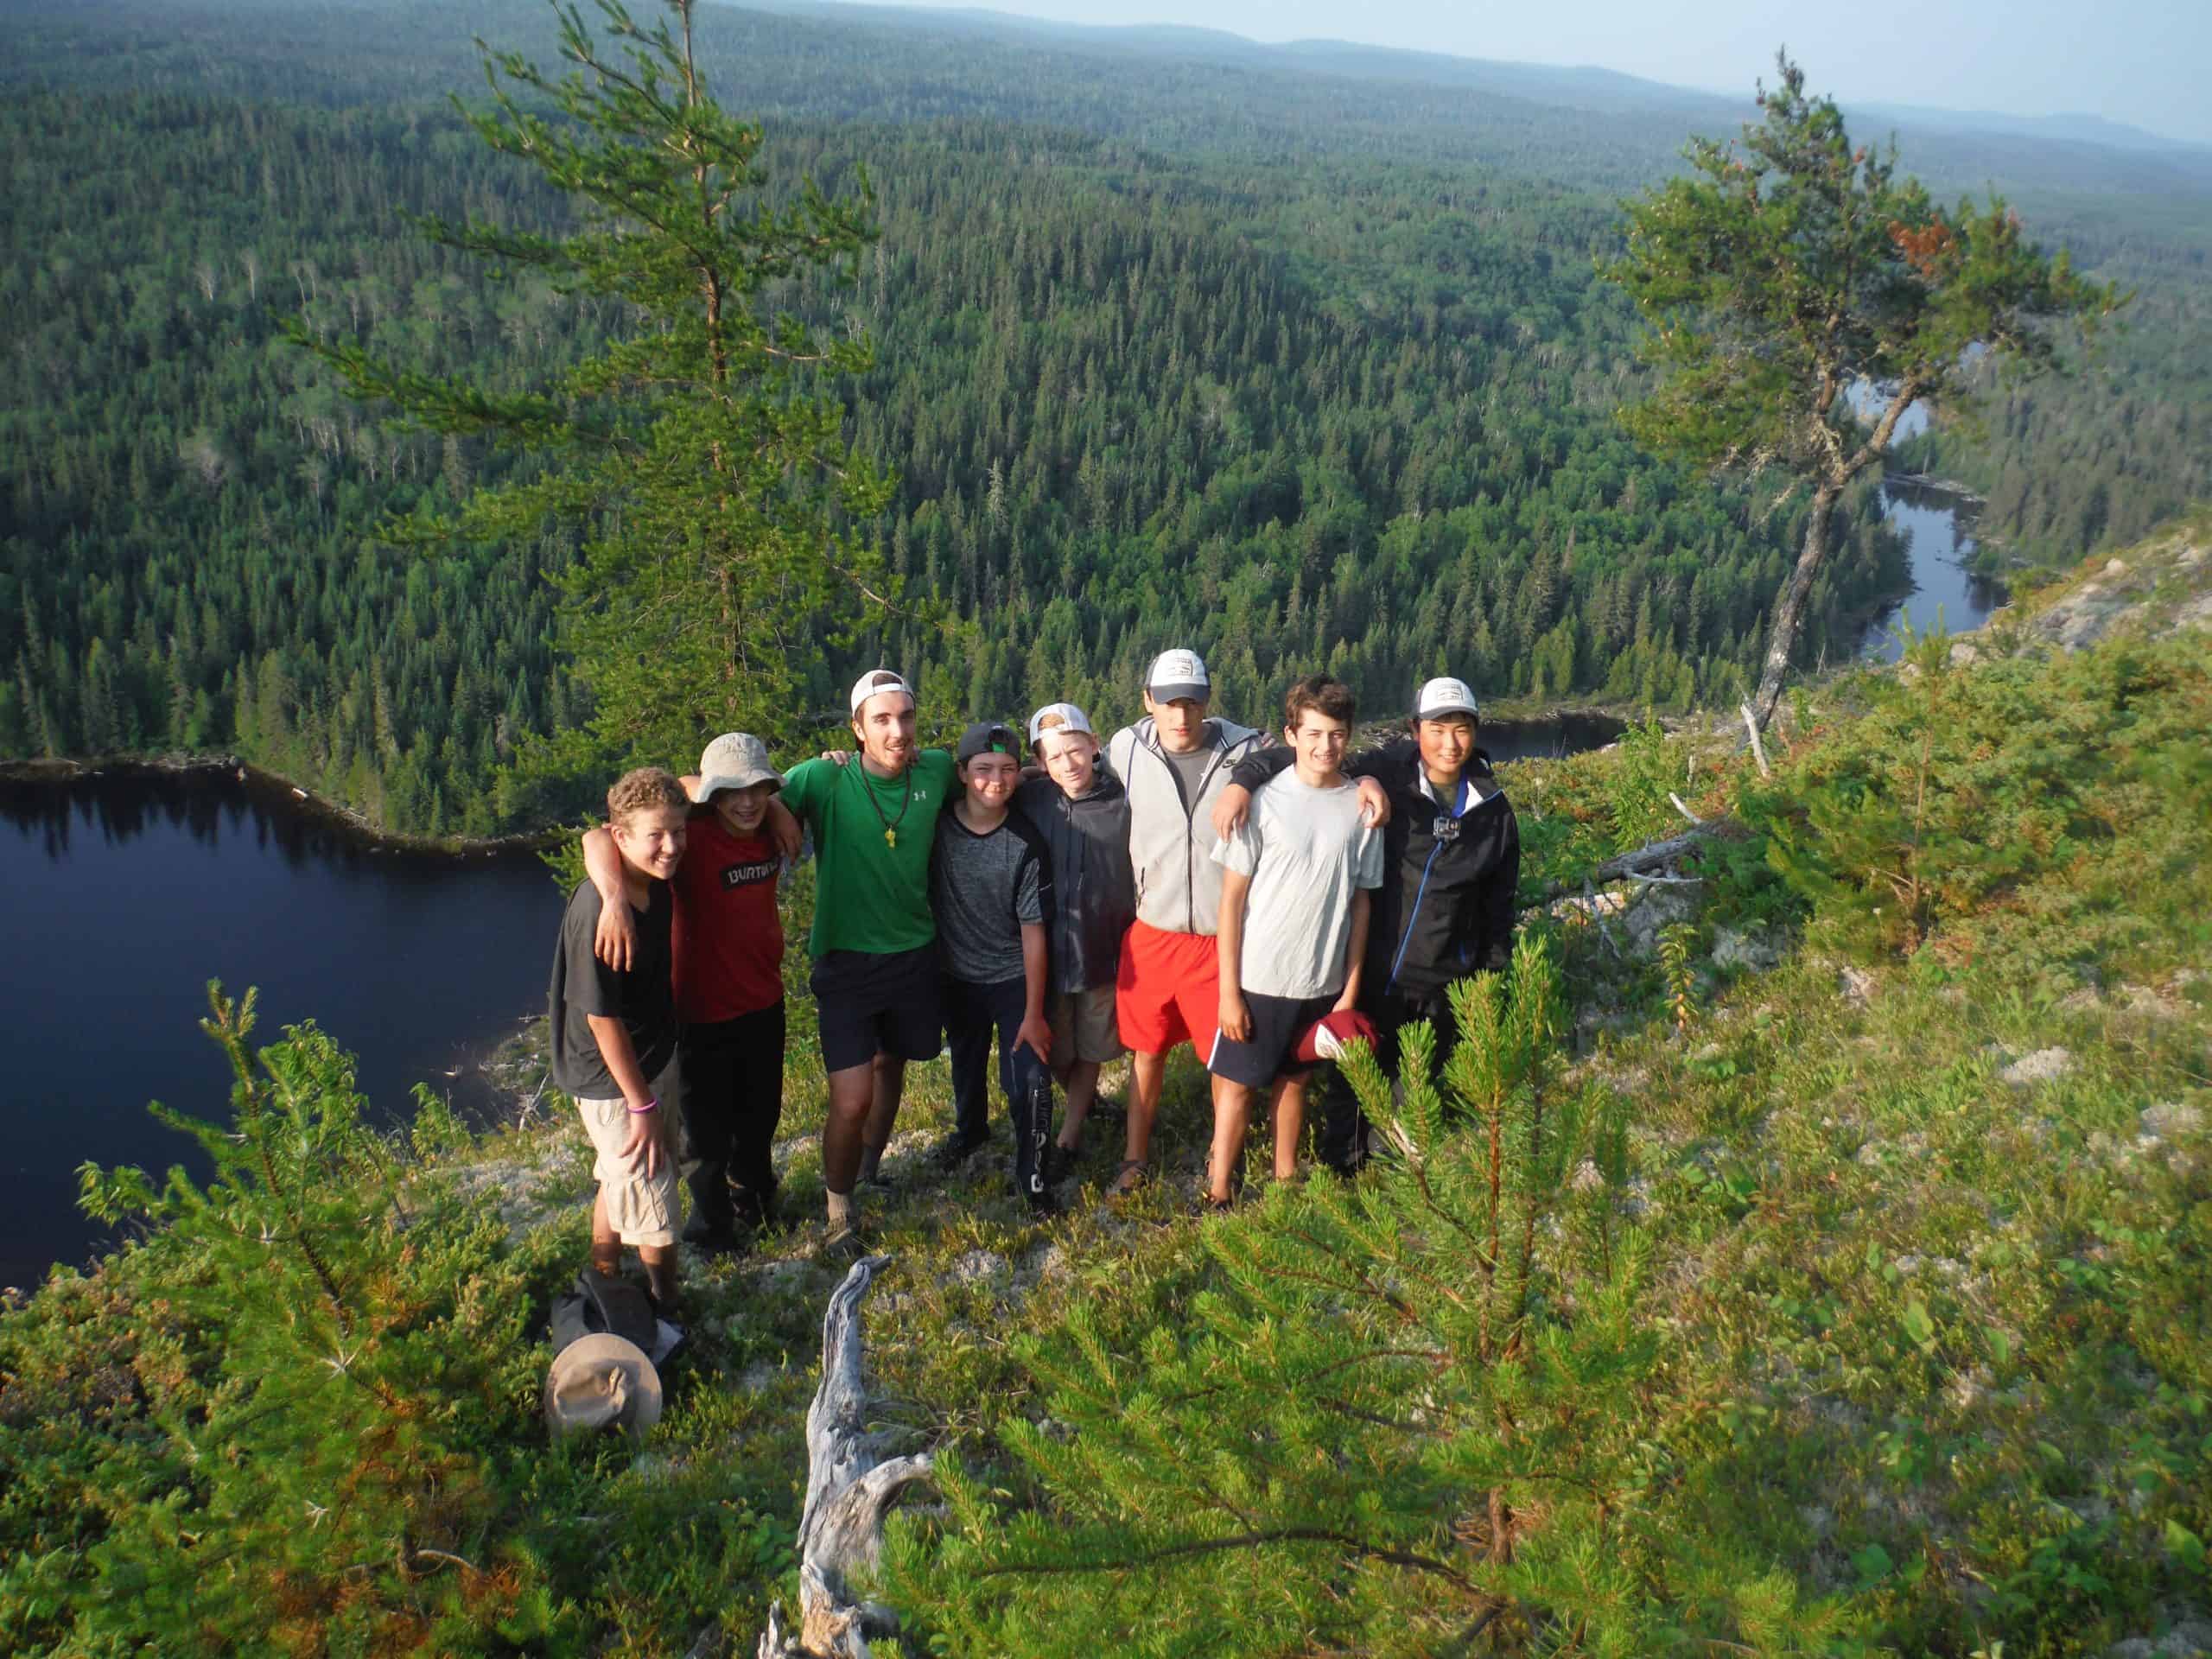 Group of LITs on a hike during a canoe trip